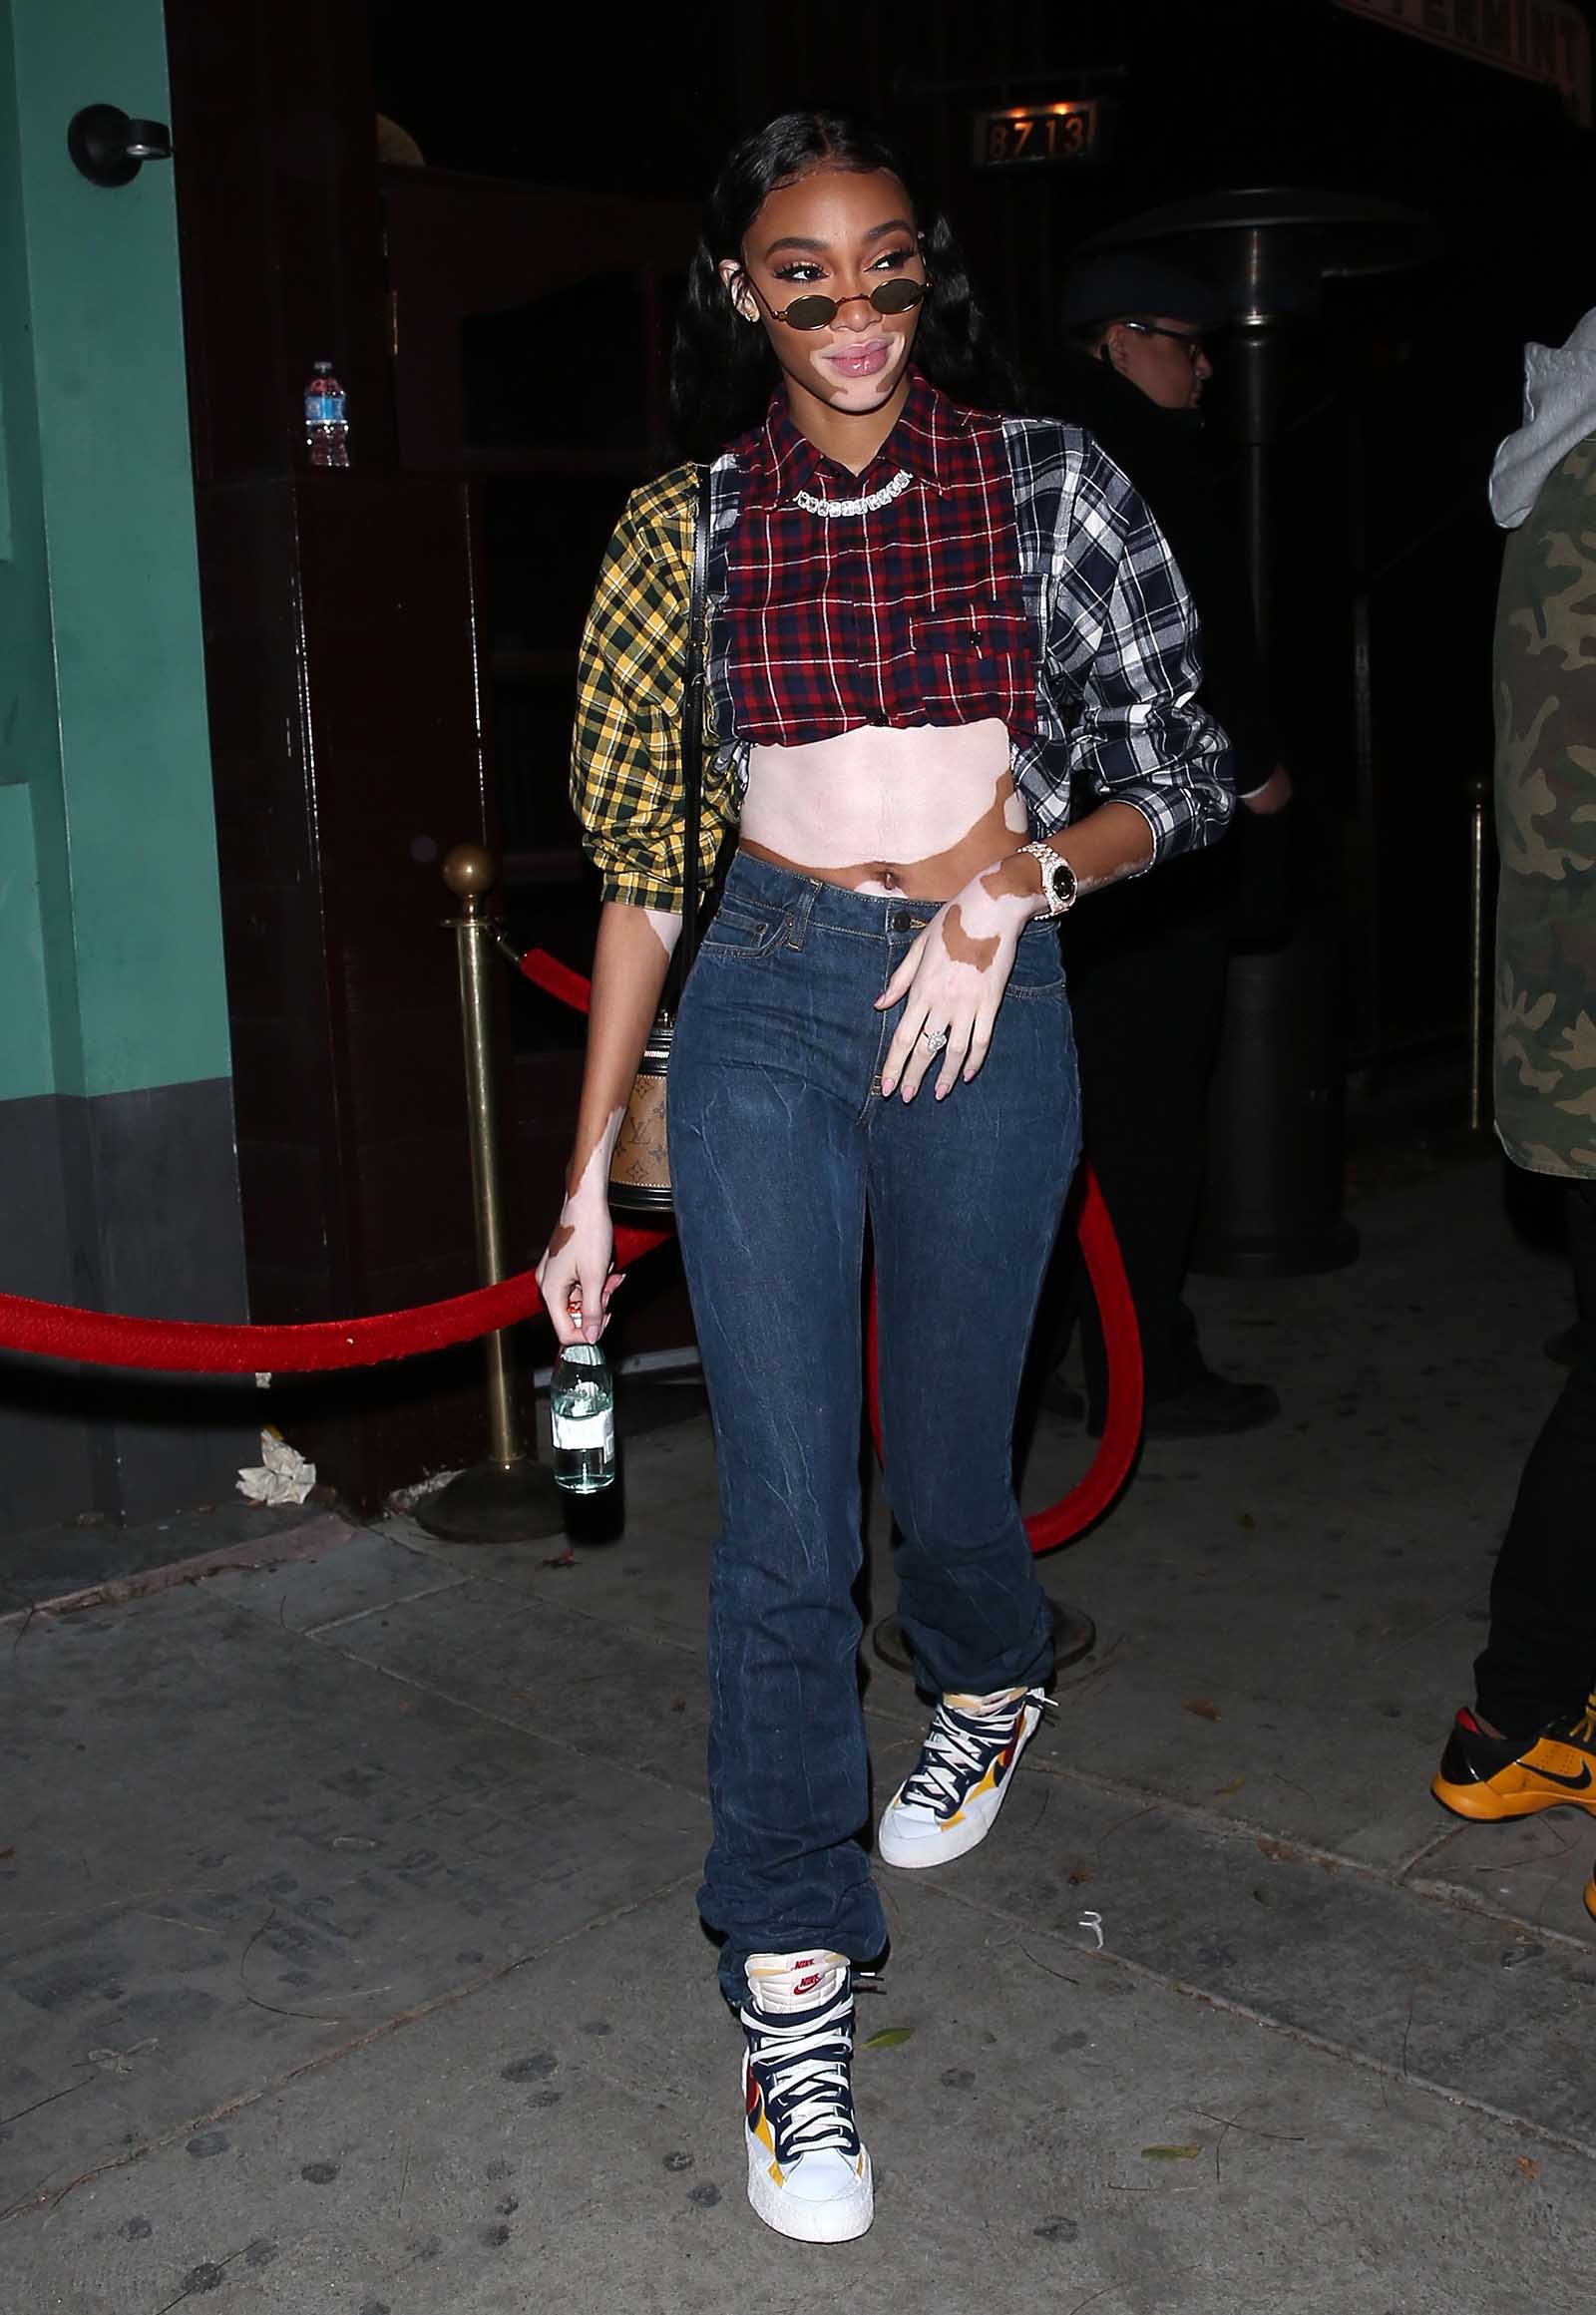 Winnie Harlow gives us 90's vibes in a patchwork flannel.